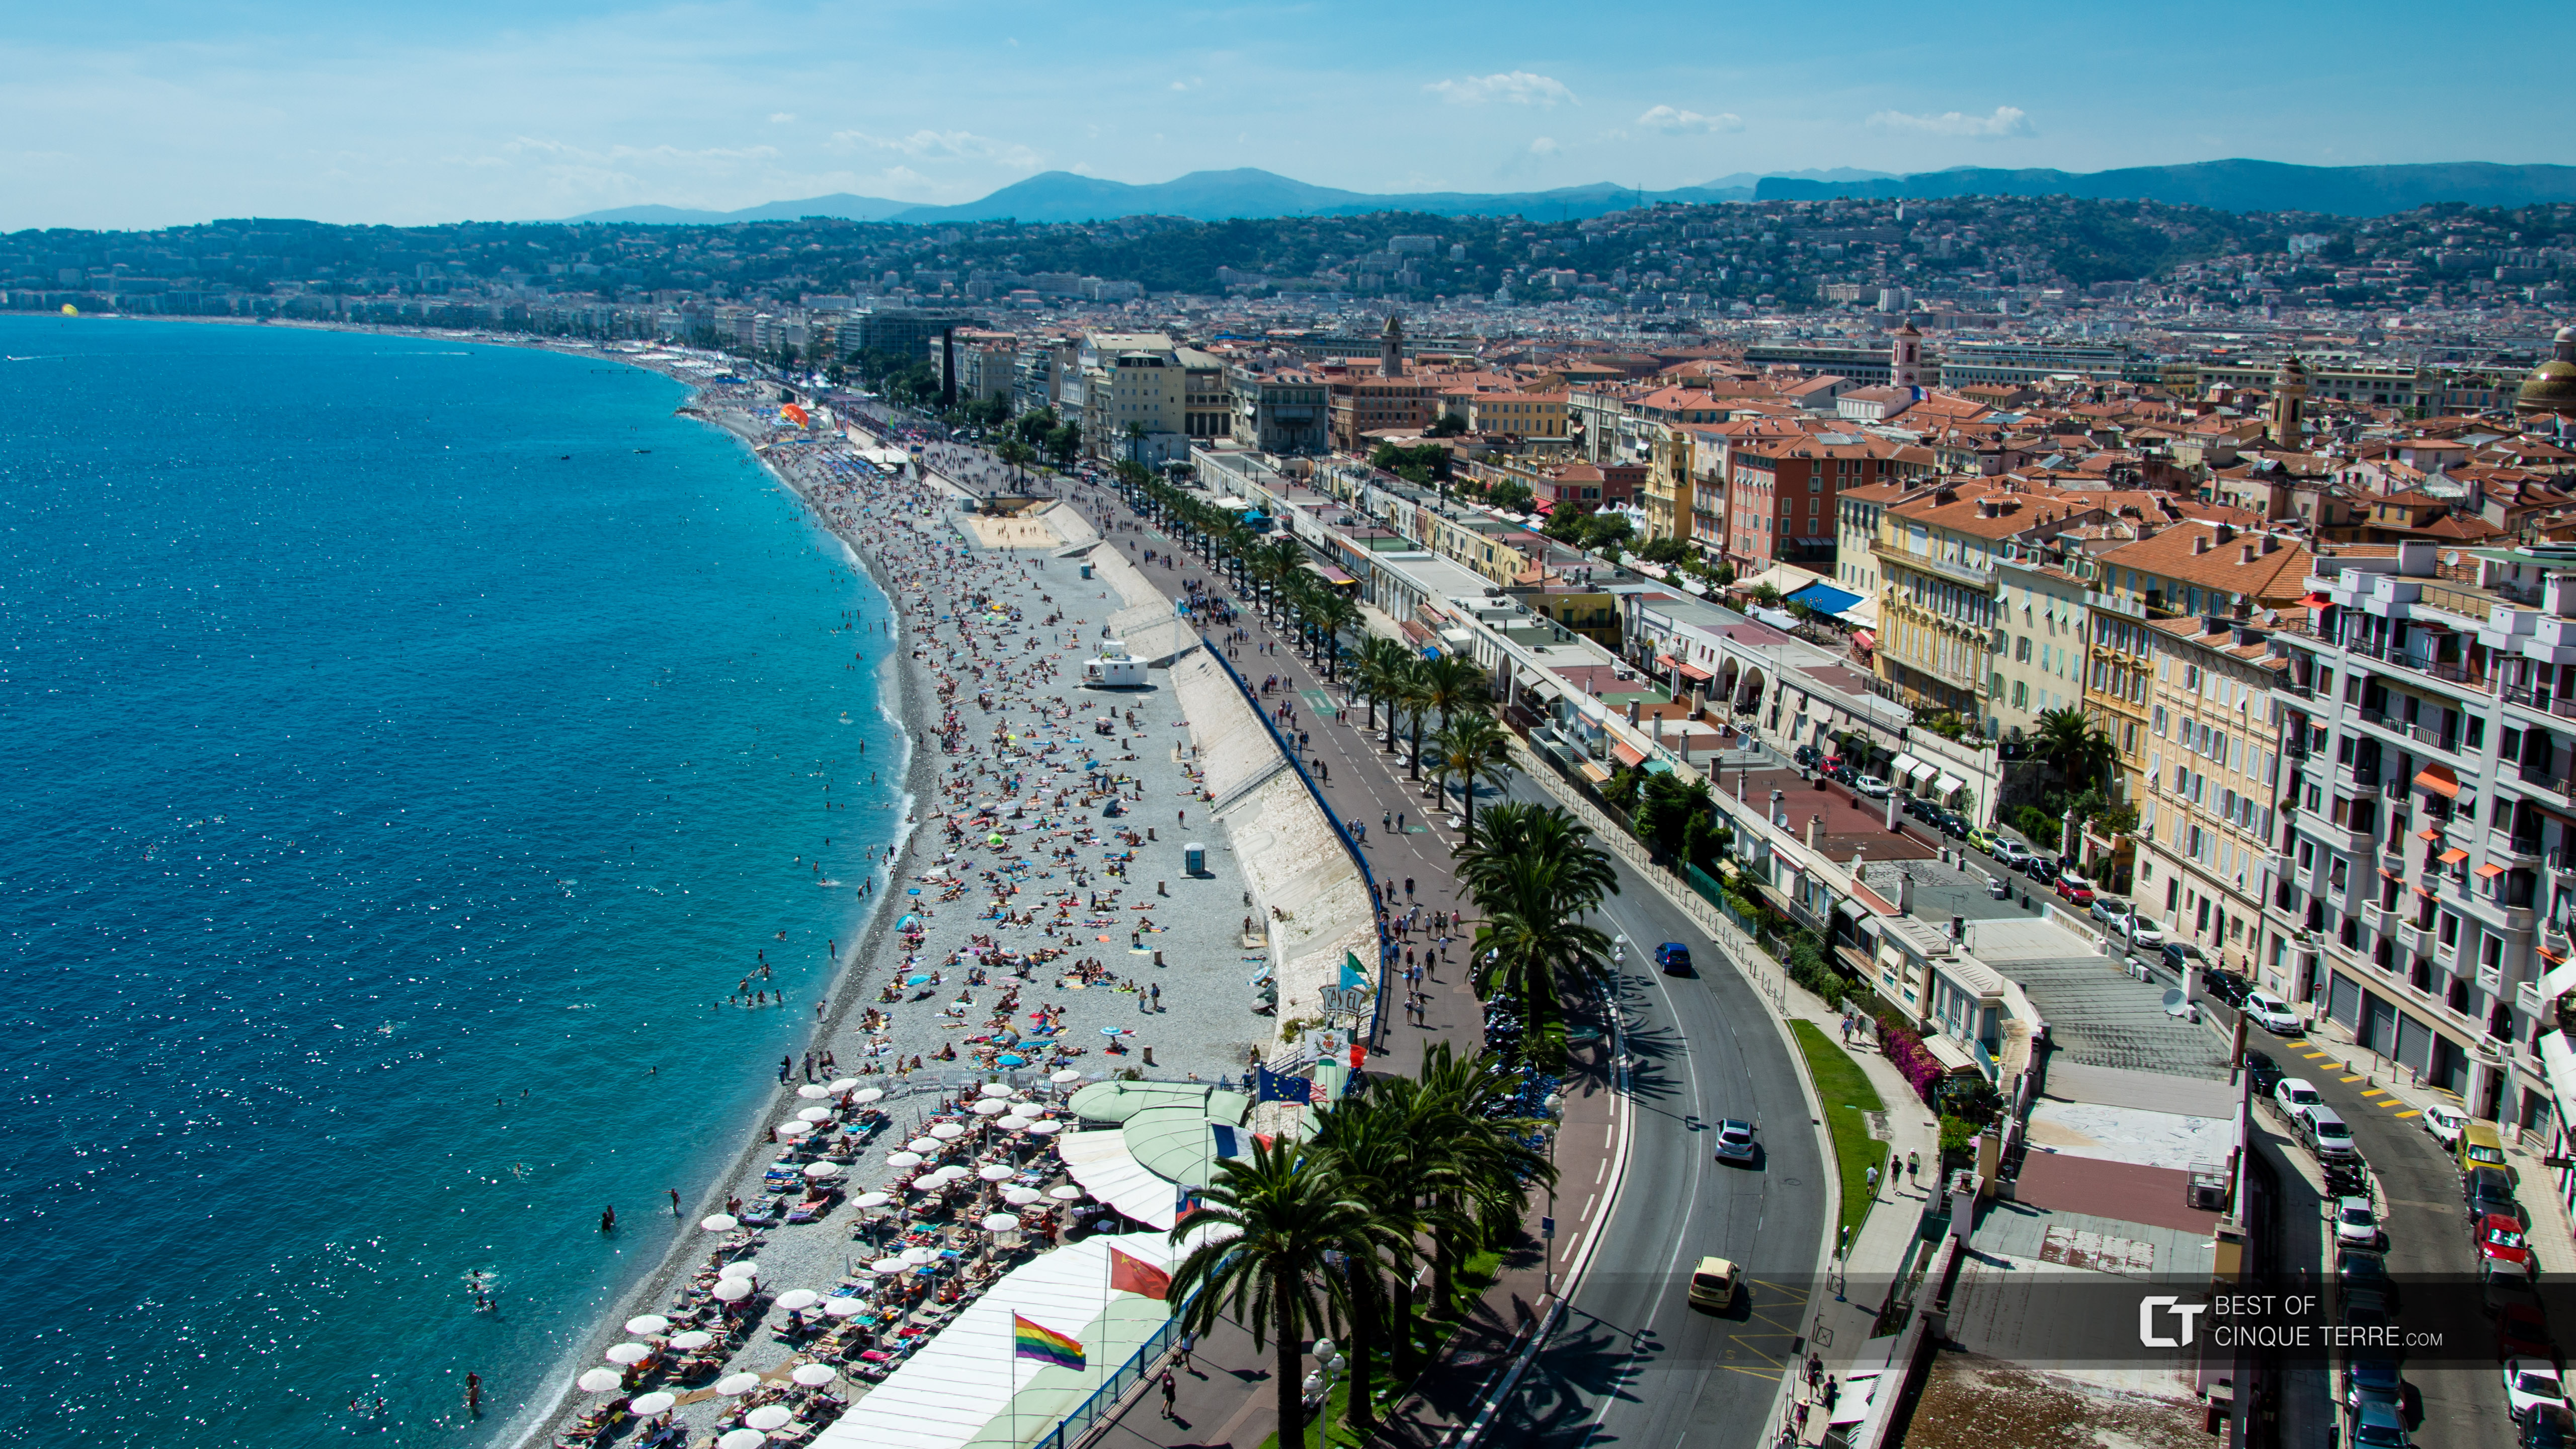 Promenade des Anglais from the Castle Hill viewpoint, Nice, France